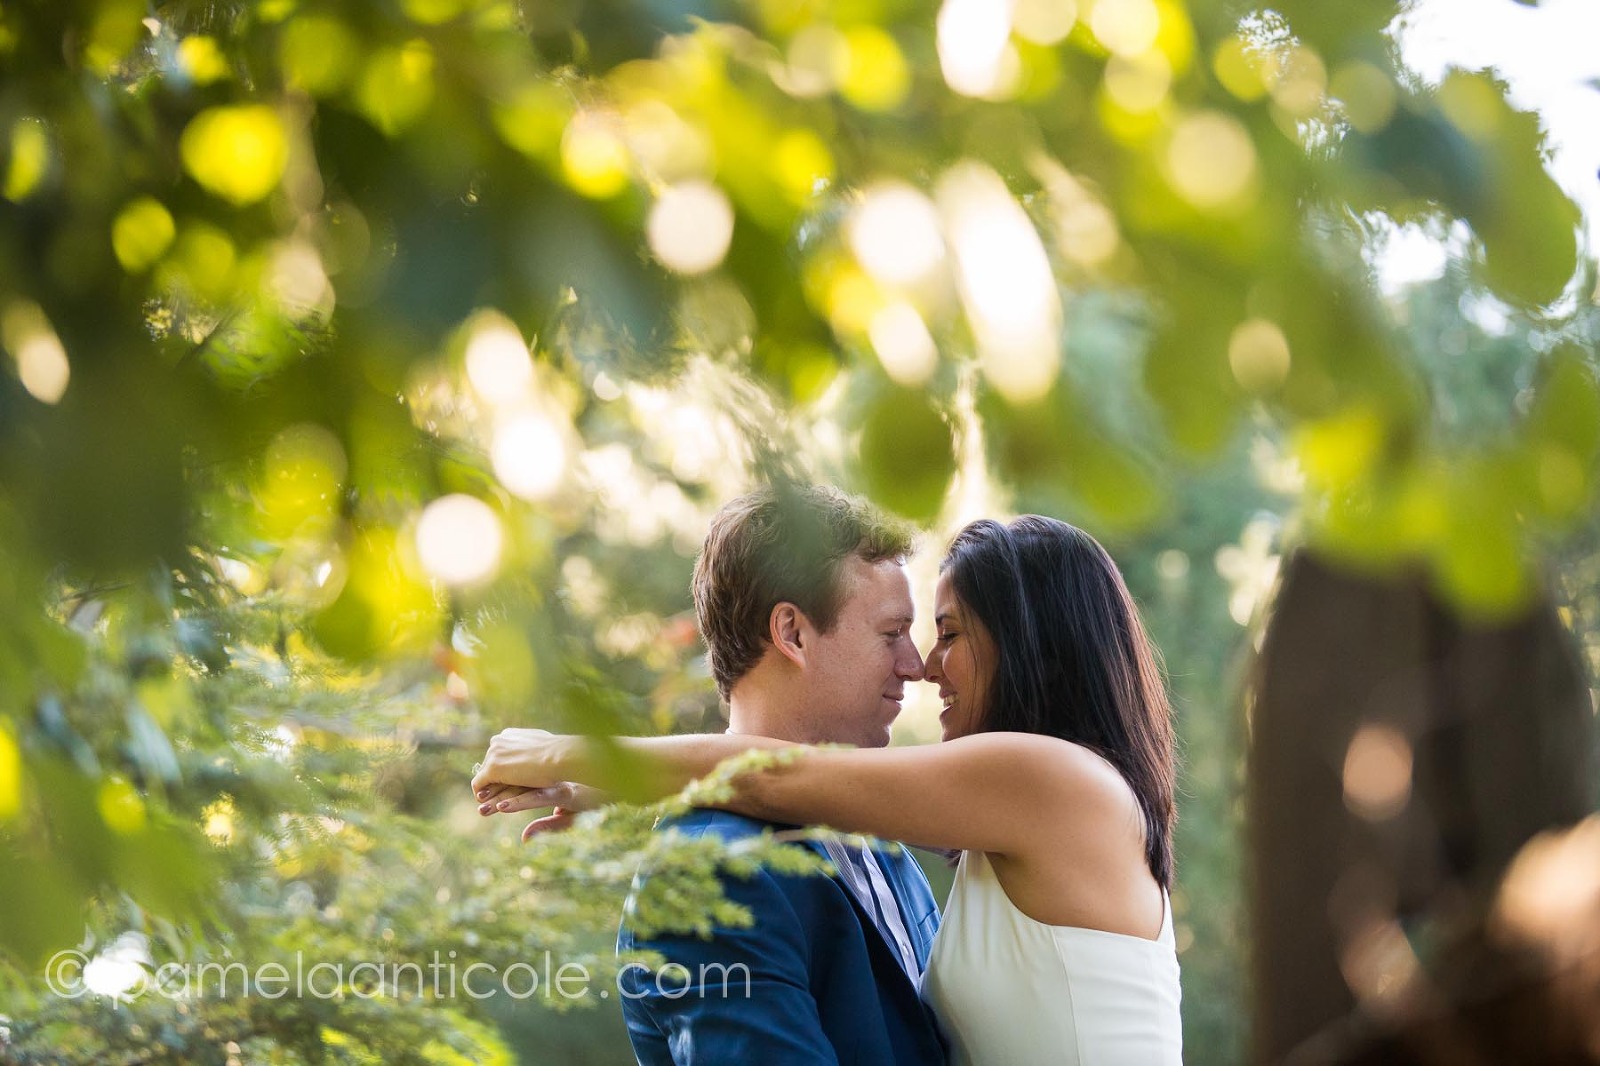 bride and groom noses together, Nicole Donatelli, Rob Dolan, Frick Park engagement photos, natural relaxed engagement photos, documentary wedding photographer in pittsburgh, experienced pittsburgh wedding photographer